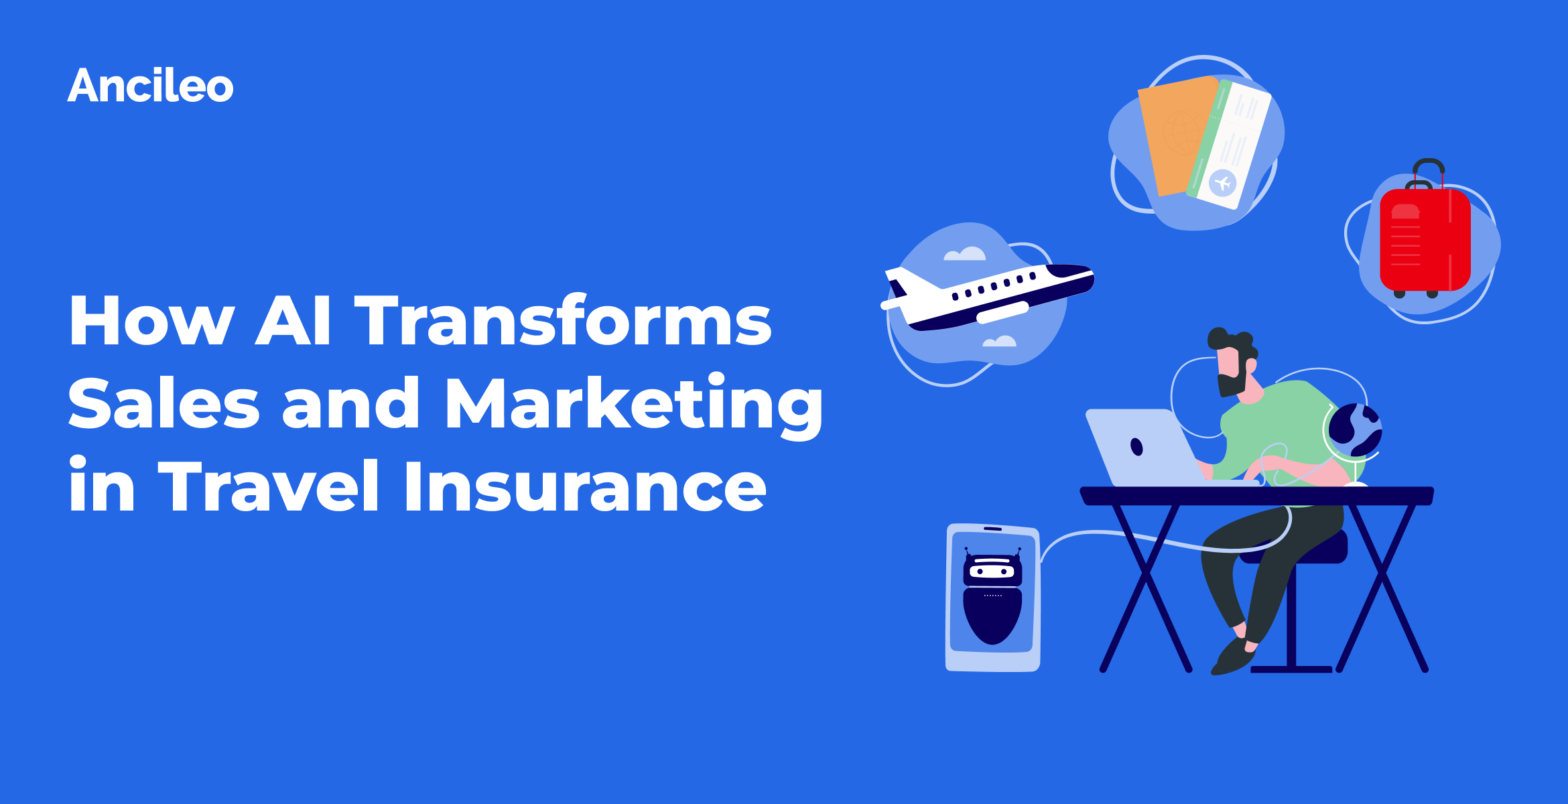 How AI Transforms Sales and Marketing in Travel Insurance